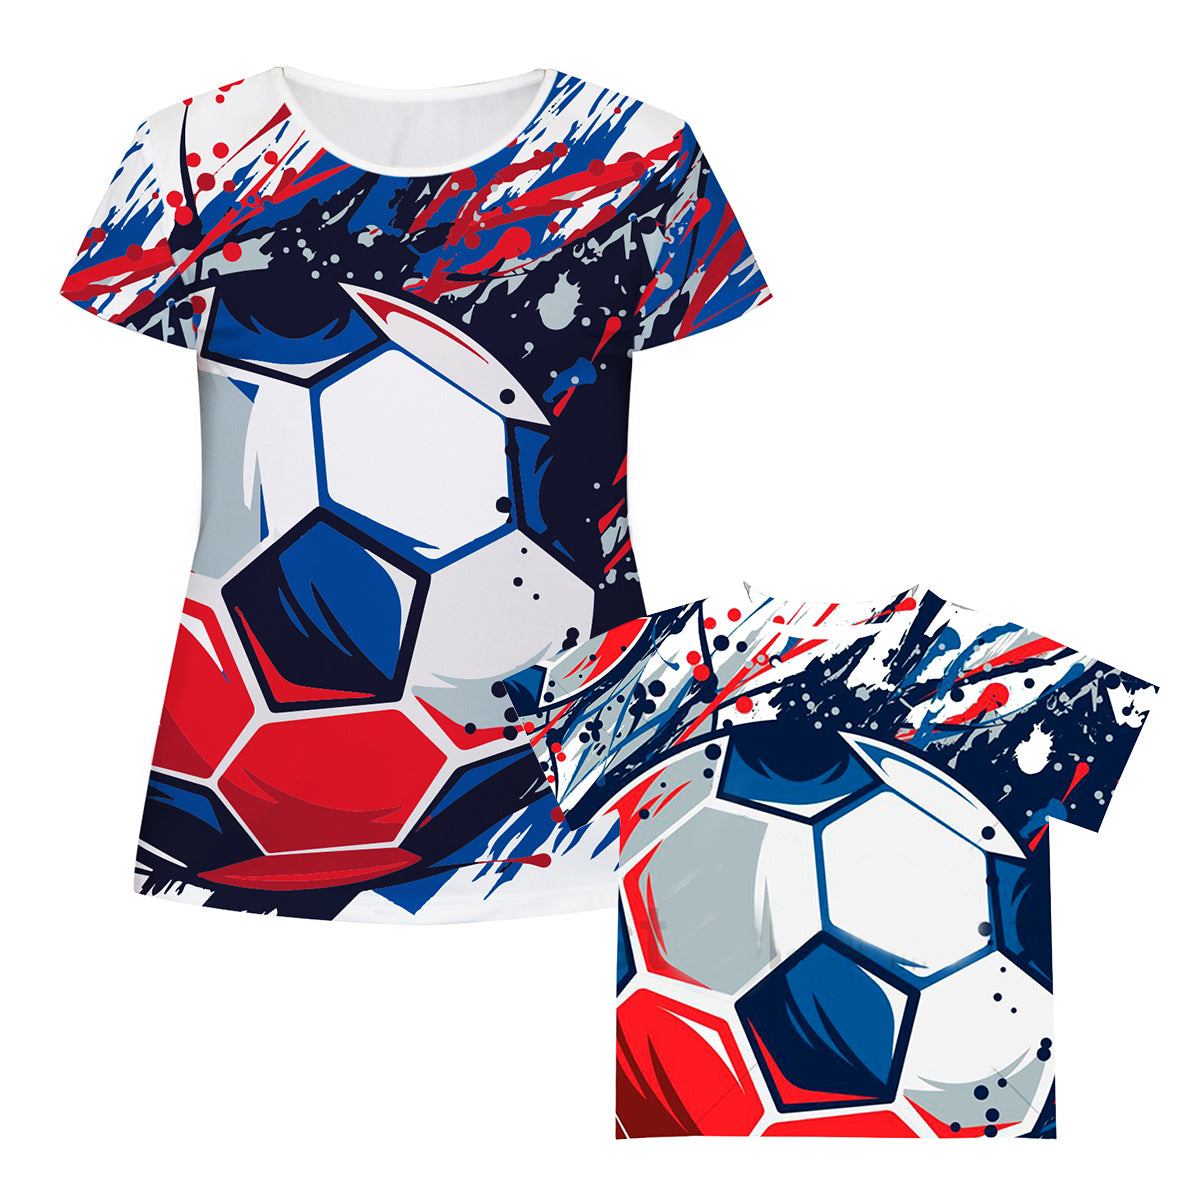 Soccer Ball Blue and Red Short Sleeve Tee Shirt - Wimziy&Co.